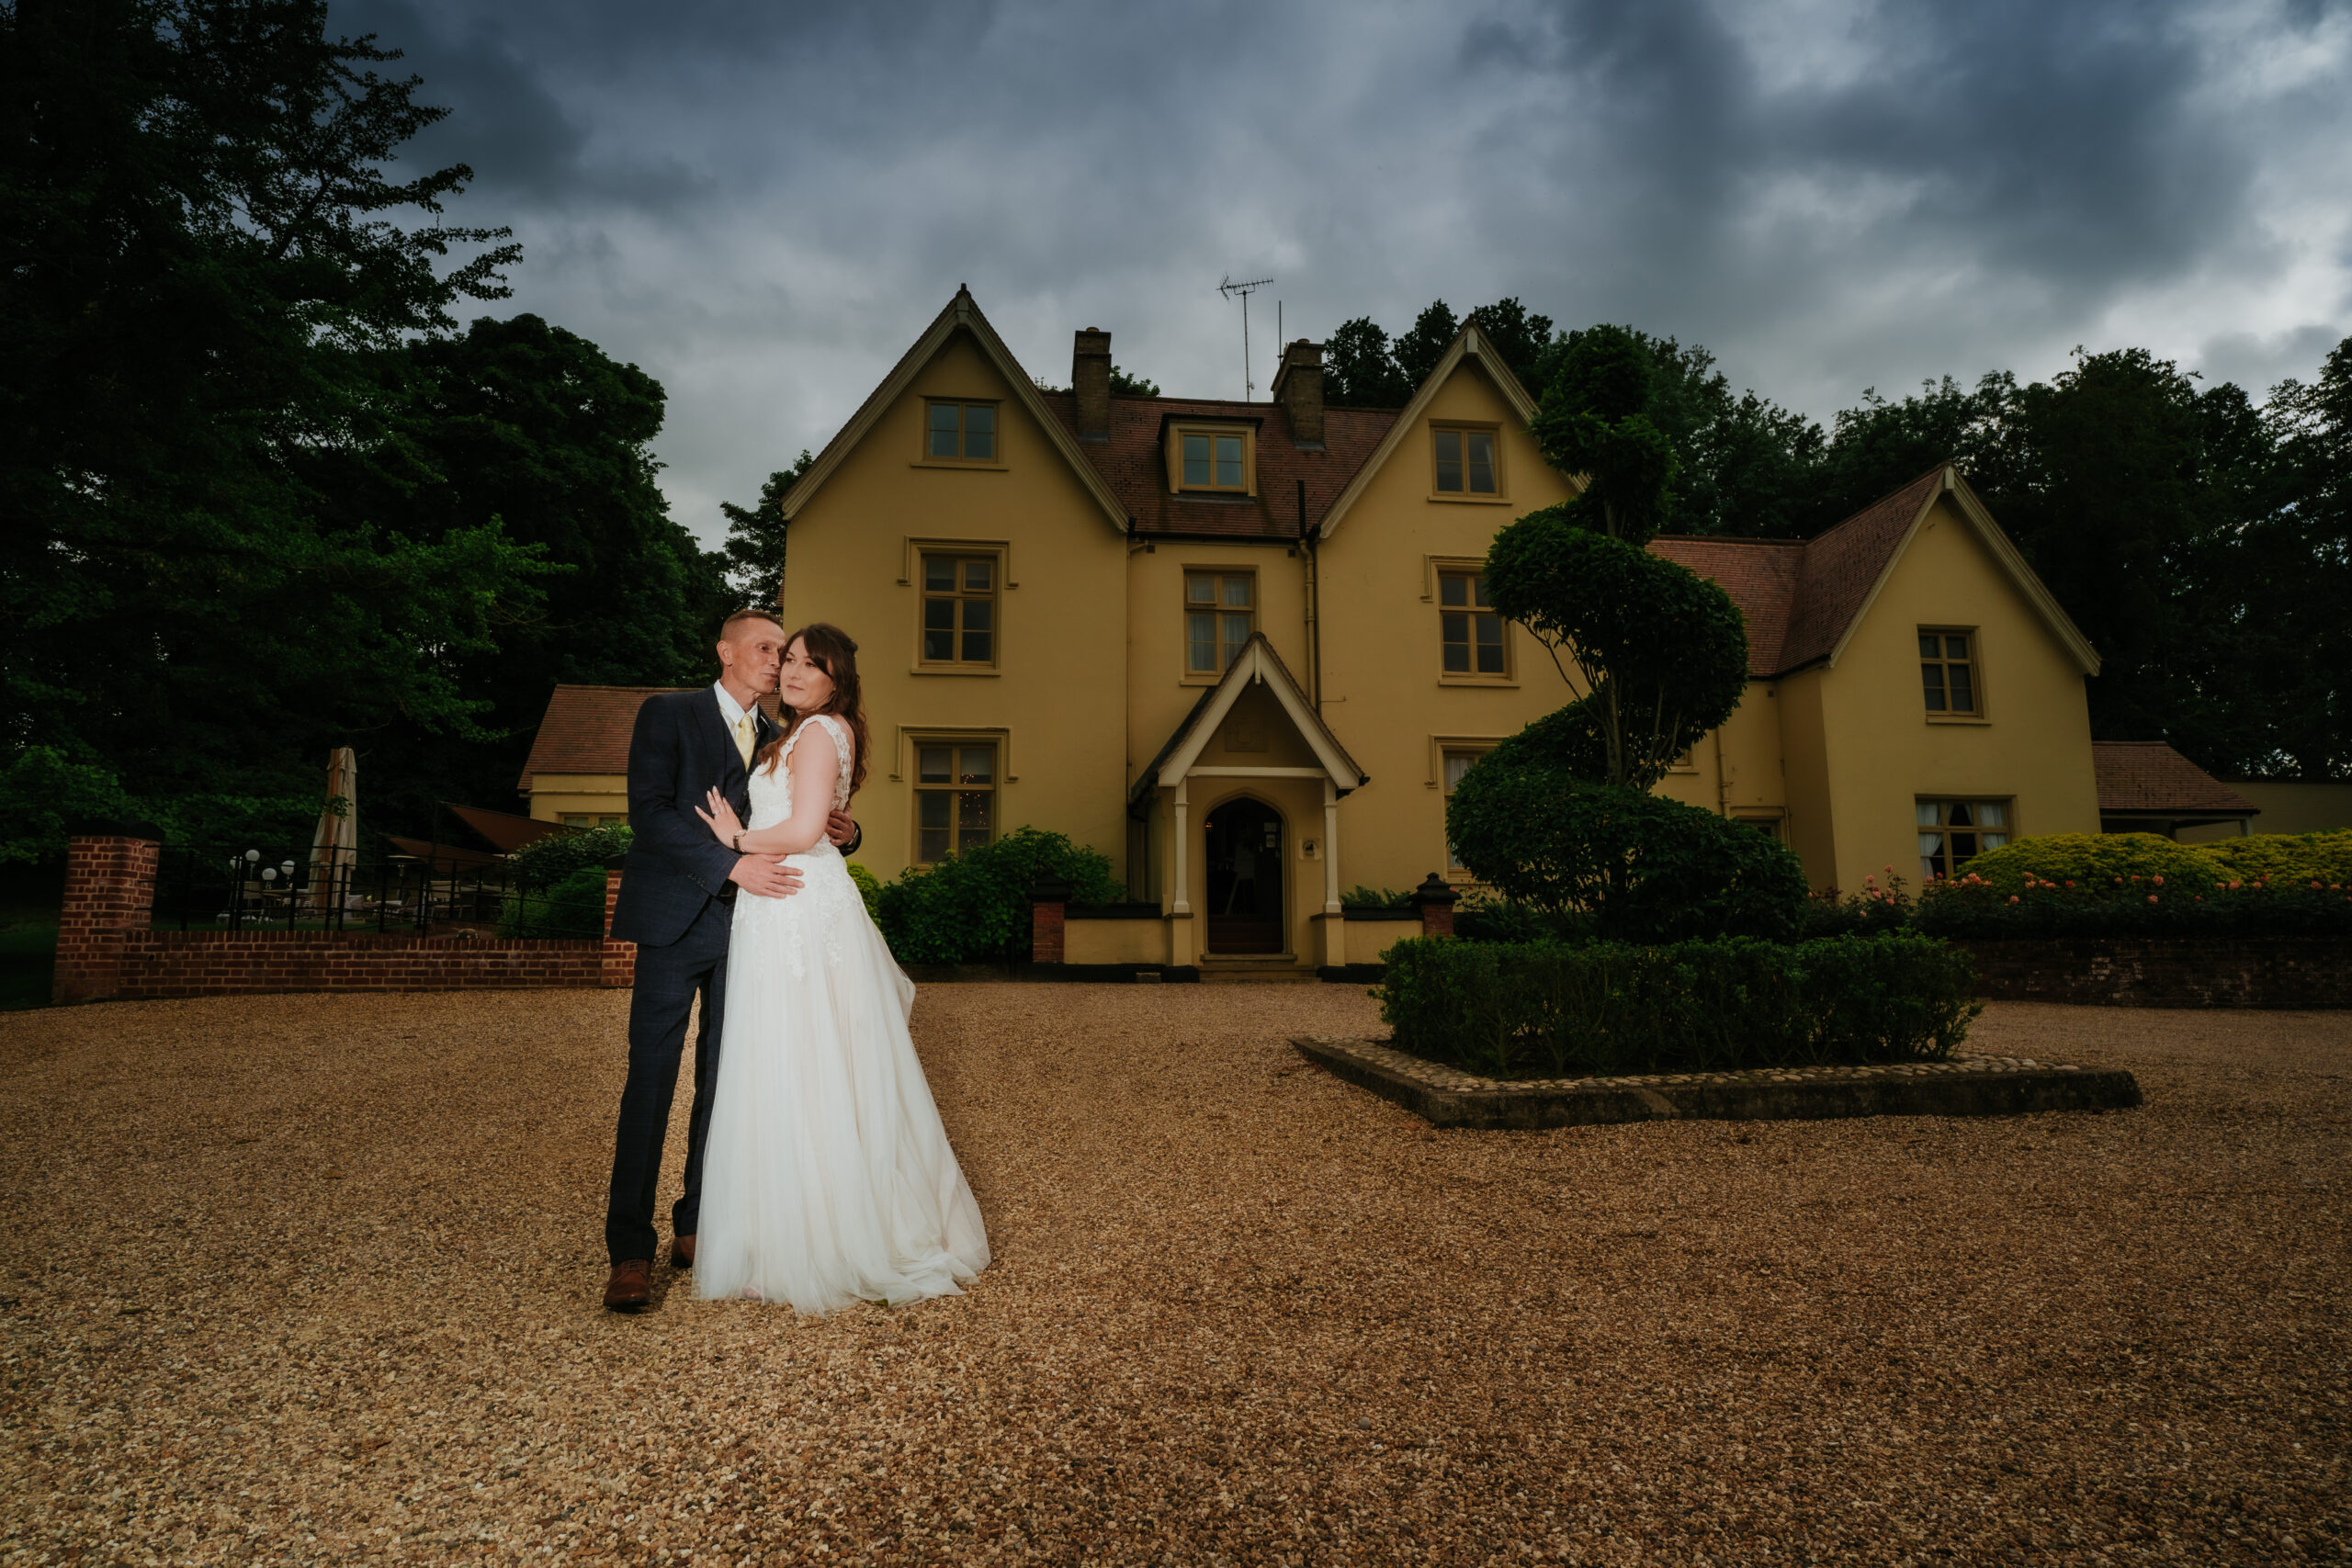 Recently married couple sharing an embrace at Maison Talbooth wedding venue in Essex